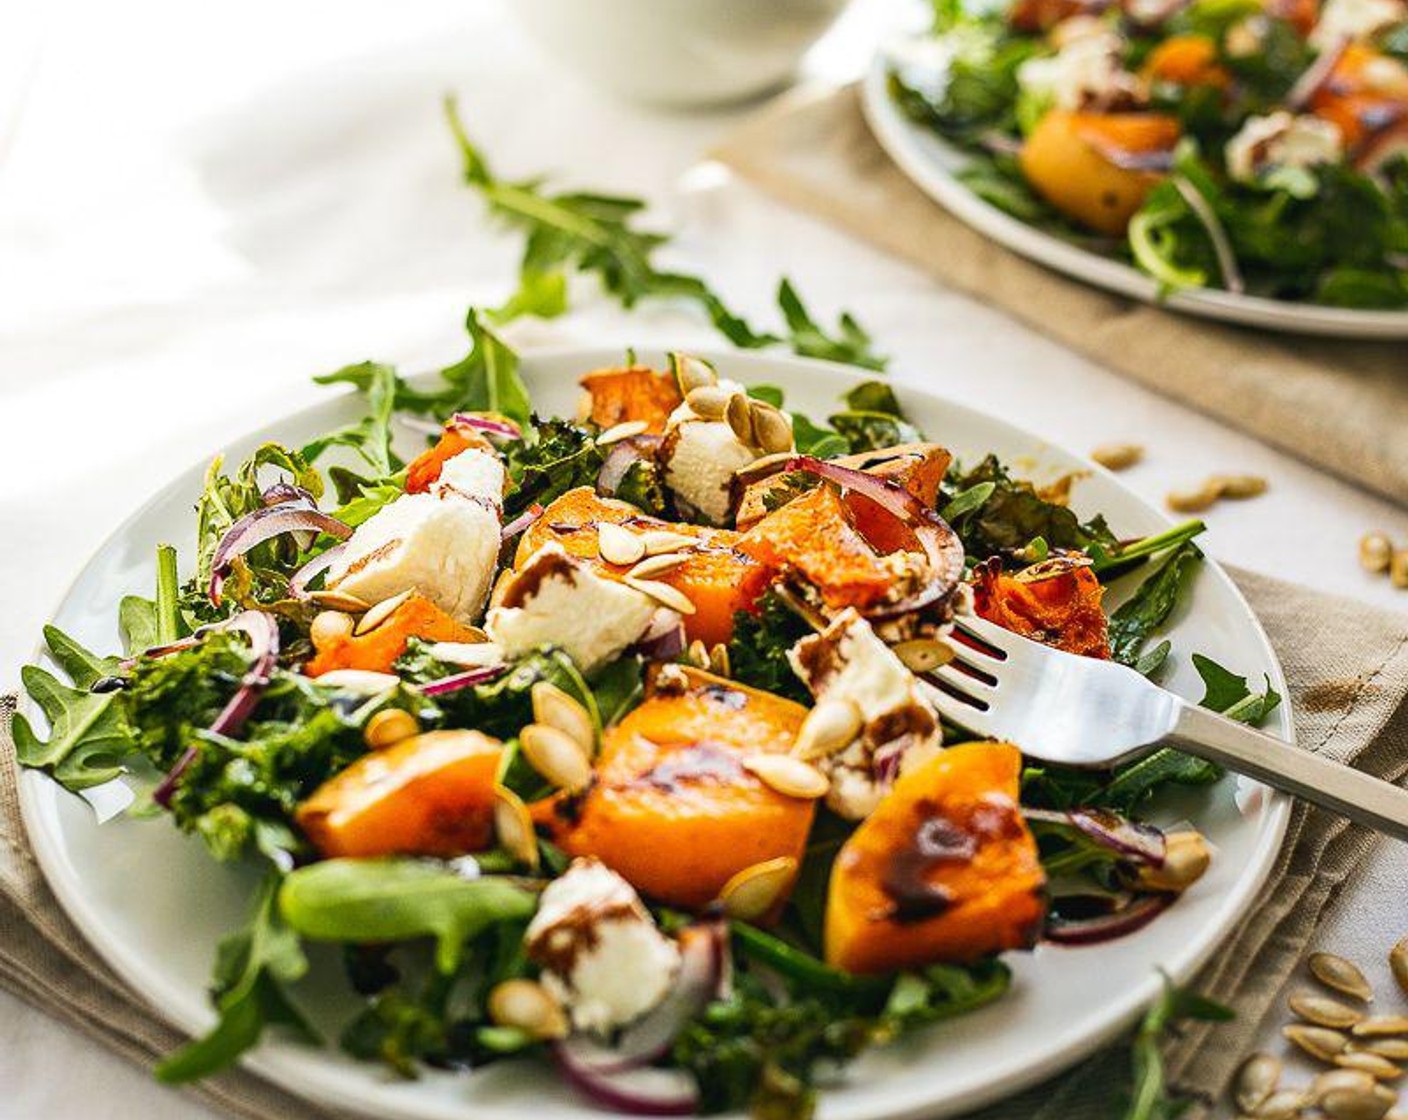 step 6 On a plate, add Arugula (to taste) as a base, then add the kale, squash, squash seeds, Red Onion (1/2), and Goat Cheese (1 cup). Drizzle some Balsamic Glaze (to taste) on top. Serve and enjoy!